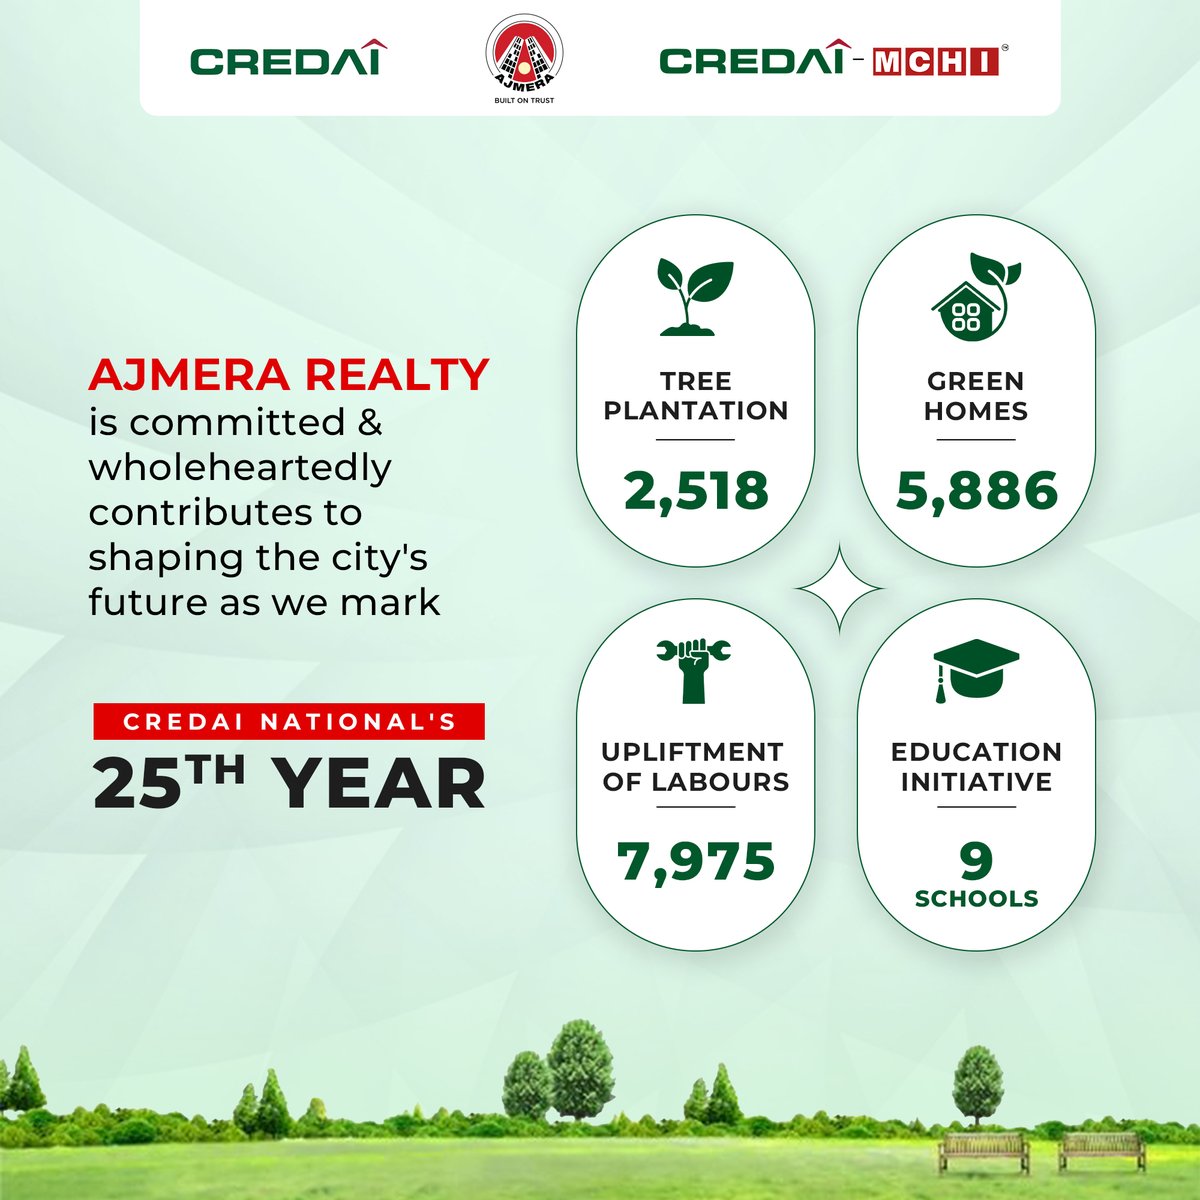 As we honor CREDAI National's 25th Year, The Ajmera Realty, an esteemed member of CREDAI-MCHI, is thrilled to extend the commitment to the community through impactful CSR activities. Together, we can make a real difference. Join us to make the world a better place.